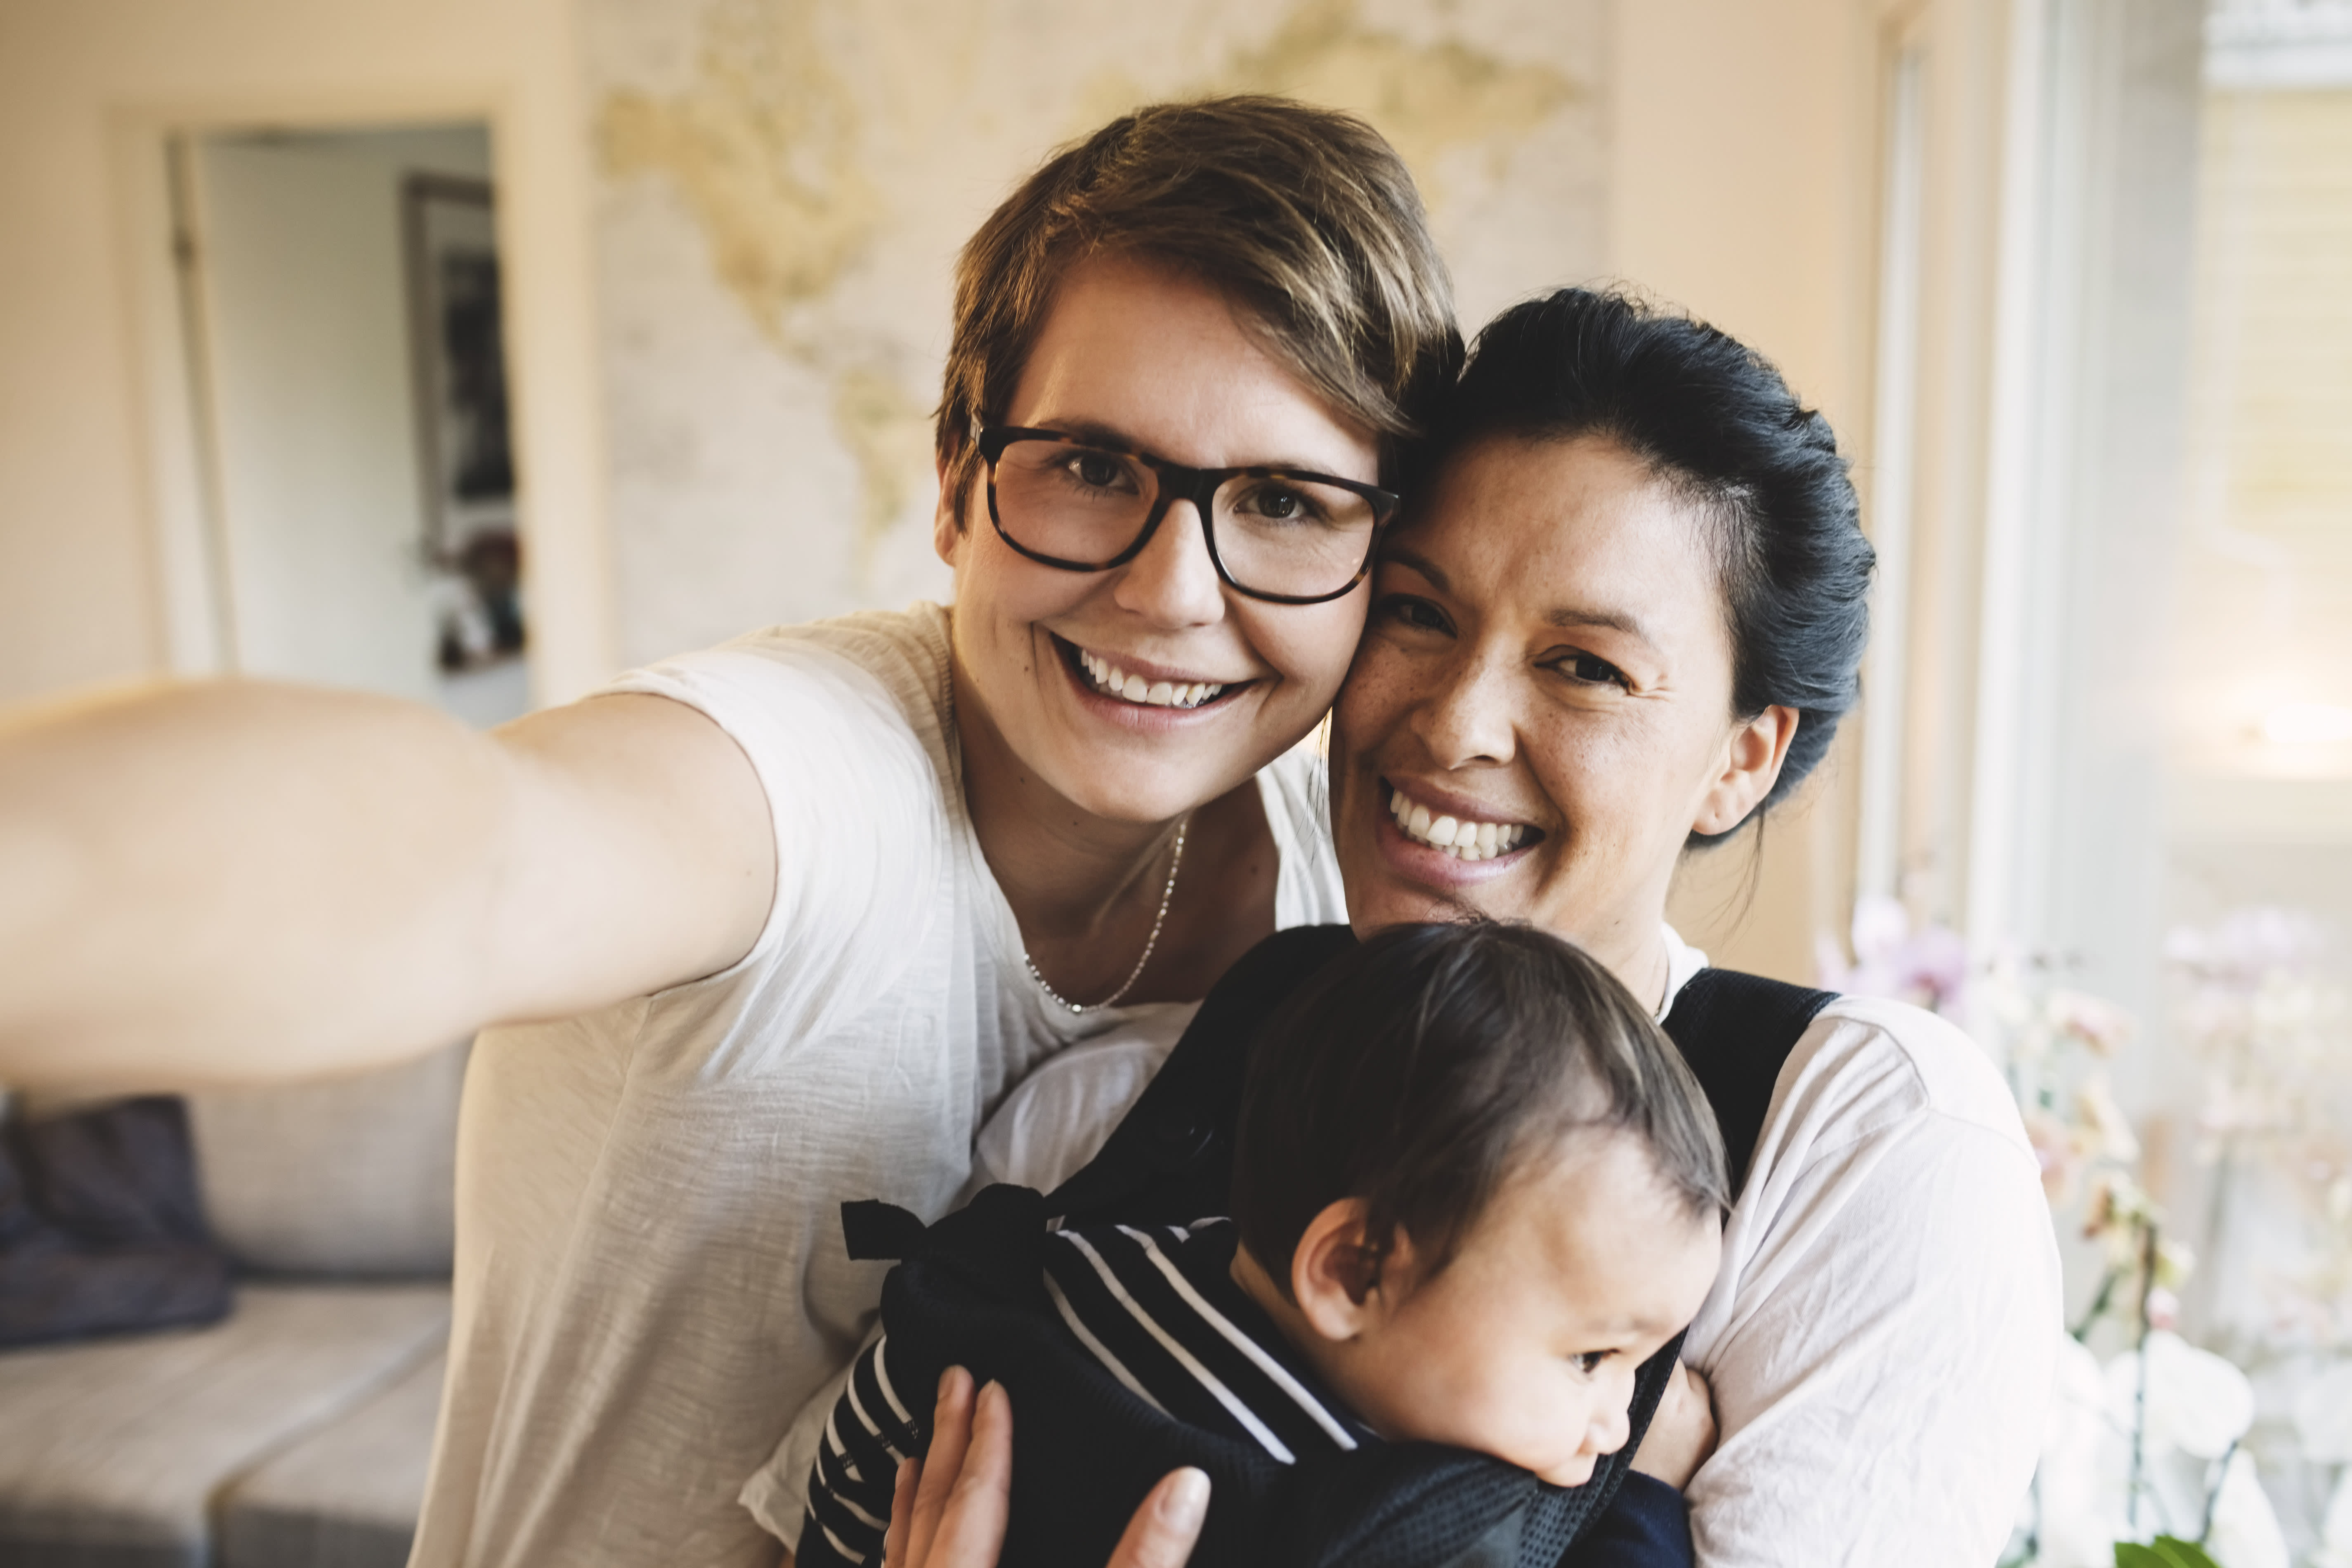  Estate planning for LGBTQ+ families is crucial. Here’s what you need to do